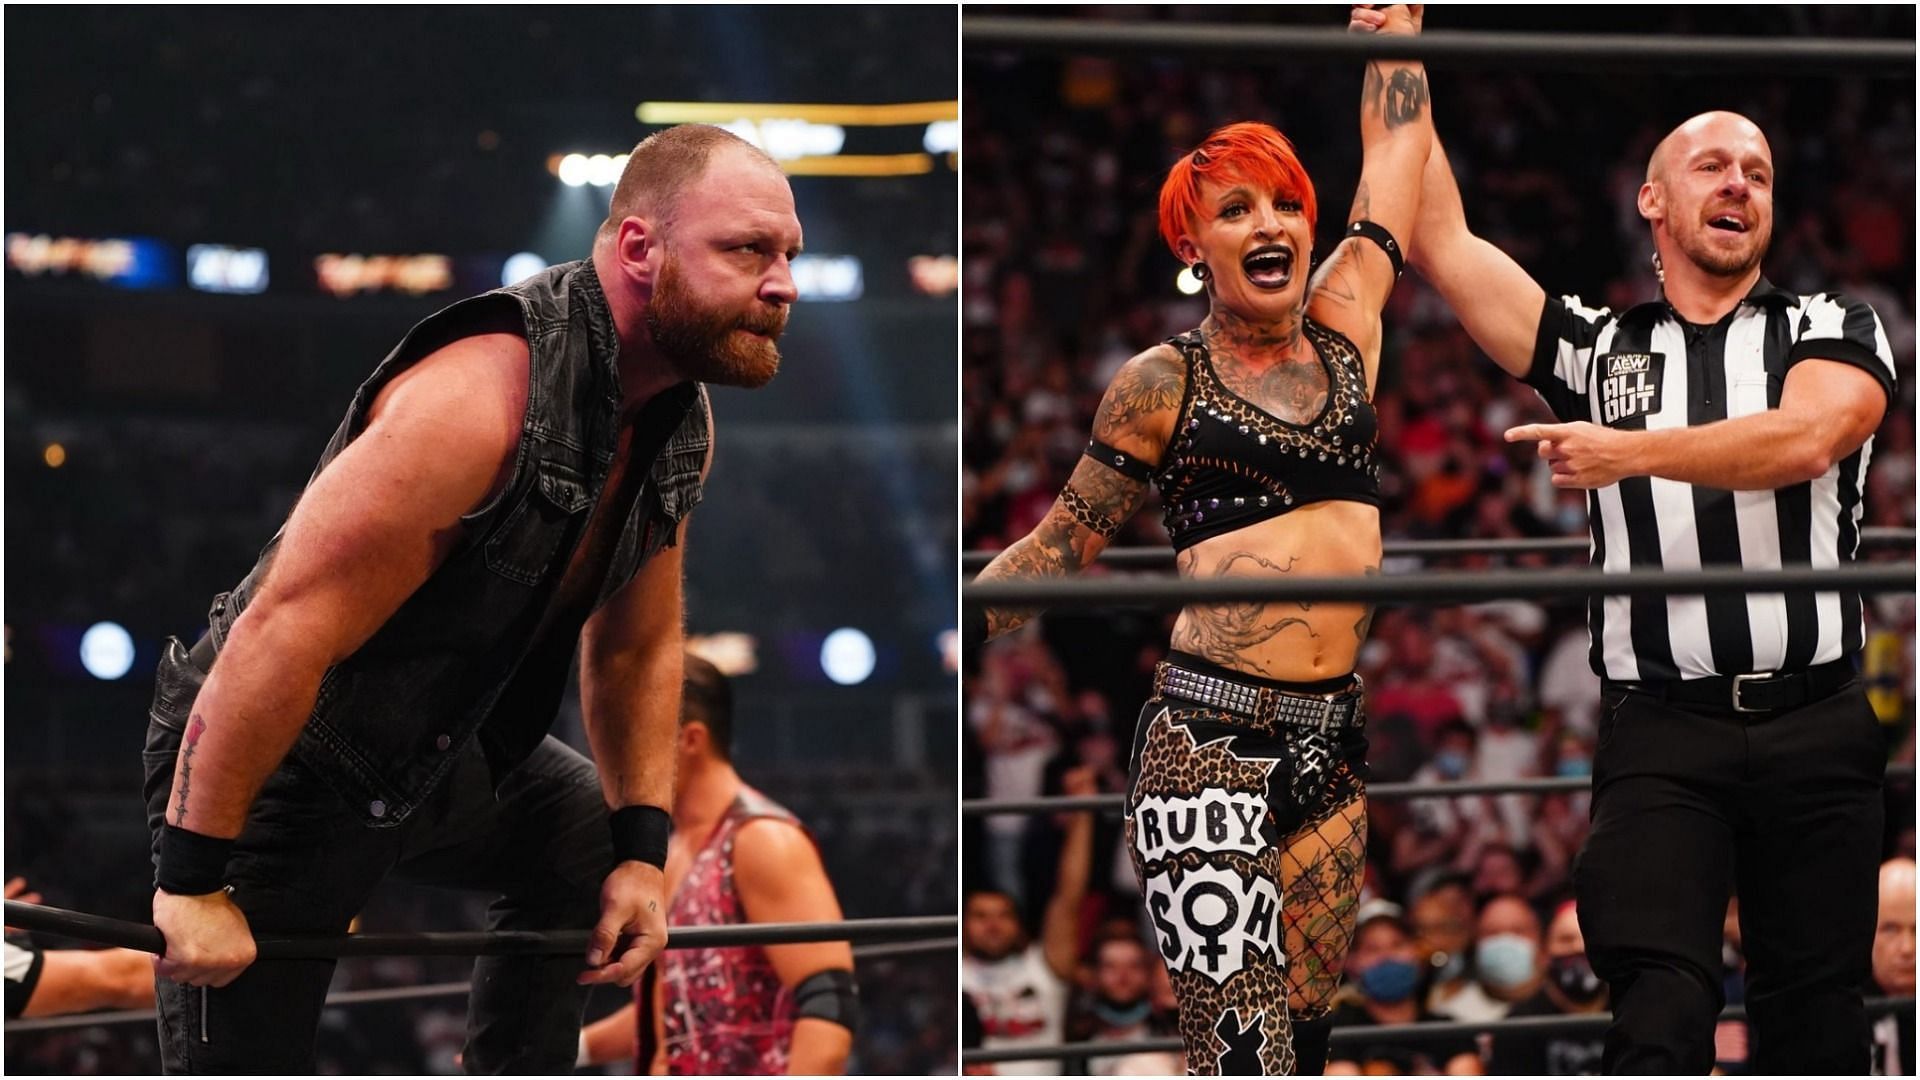 Jon Moxley and Ruby Soho both competed at The WRLD on GCW